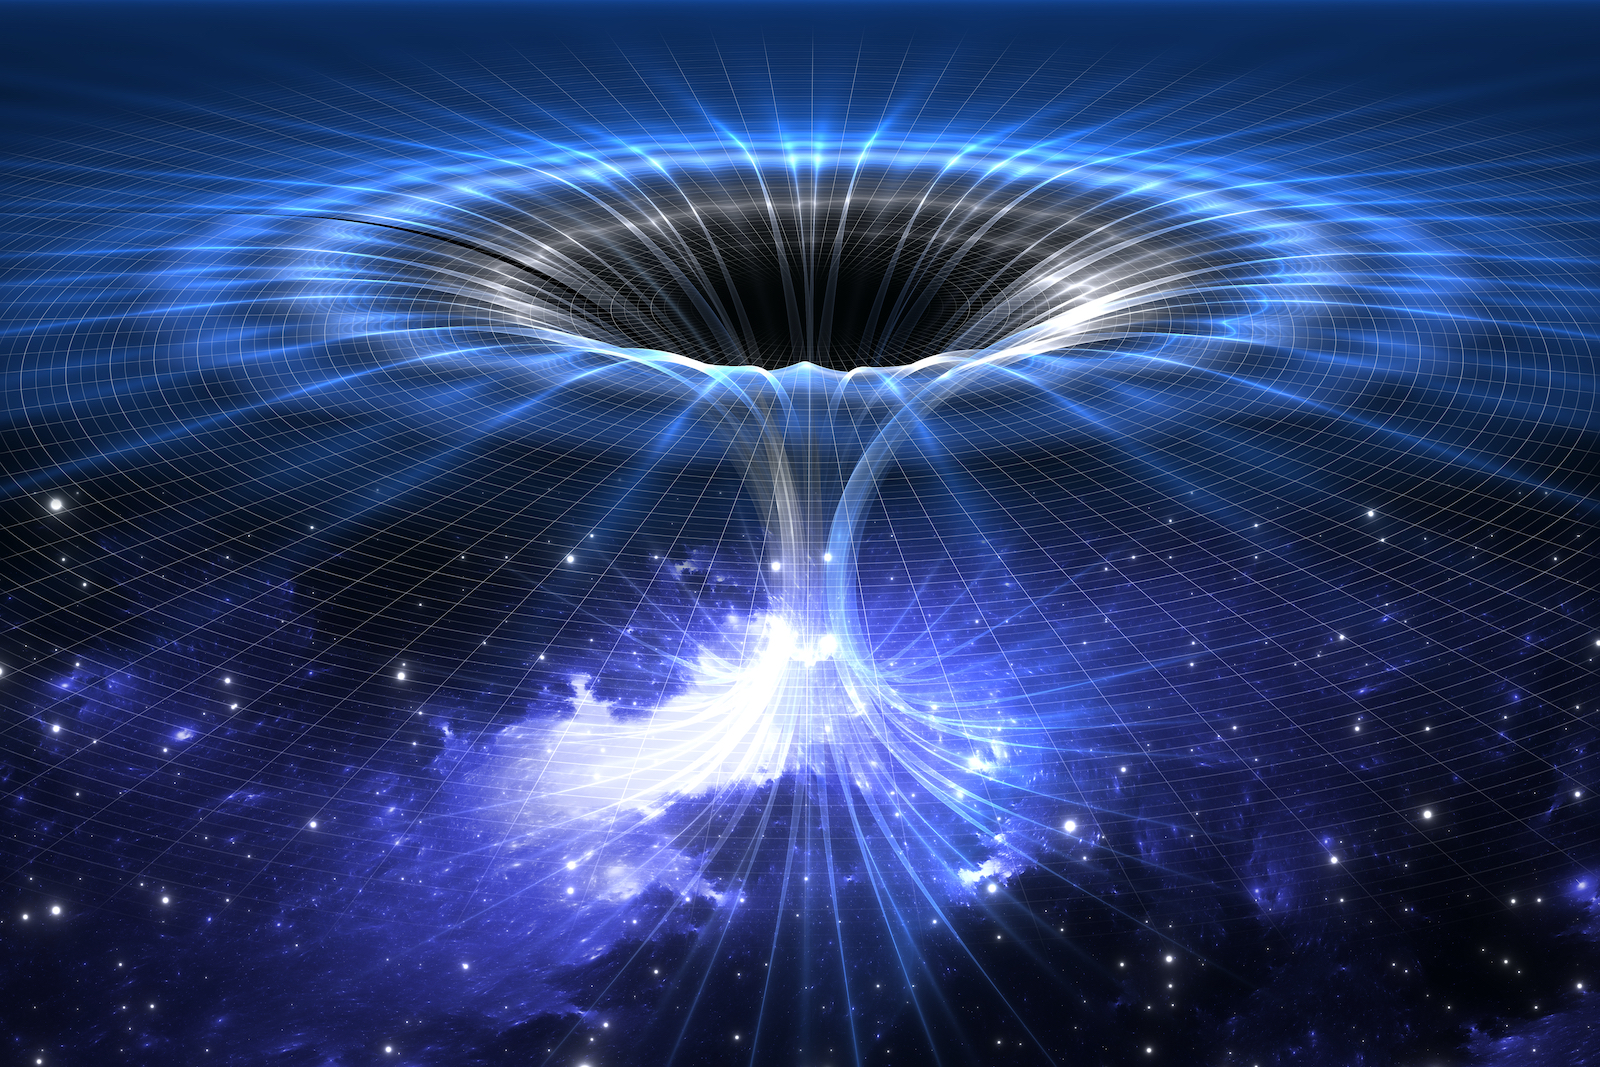 You can think of a wormhole as a tunnel with two ends opening up to different points in spacetime.